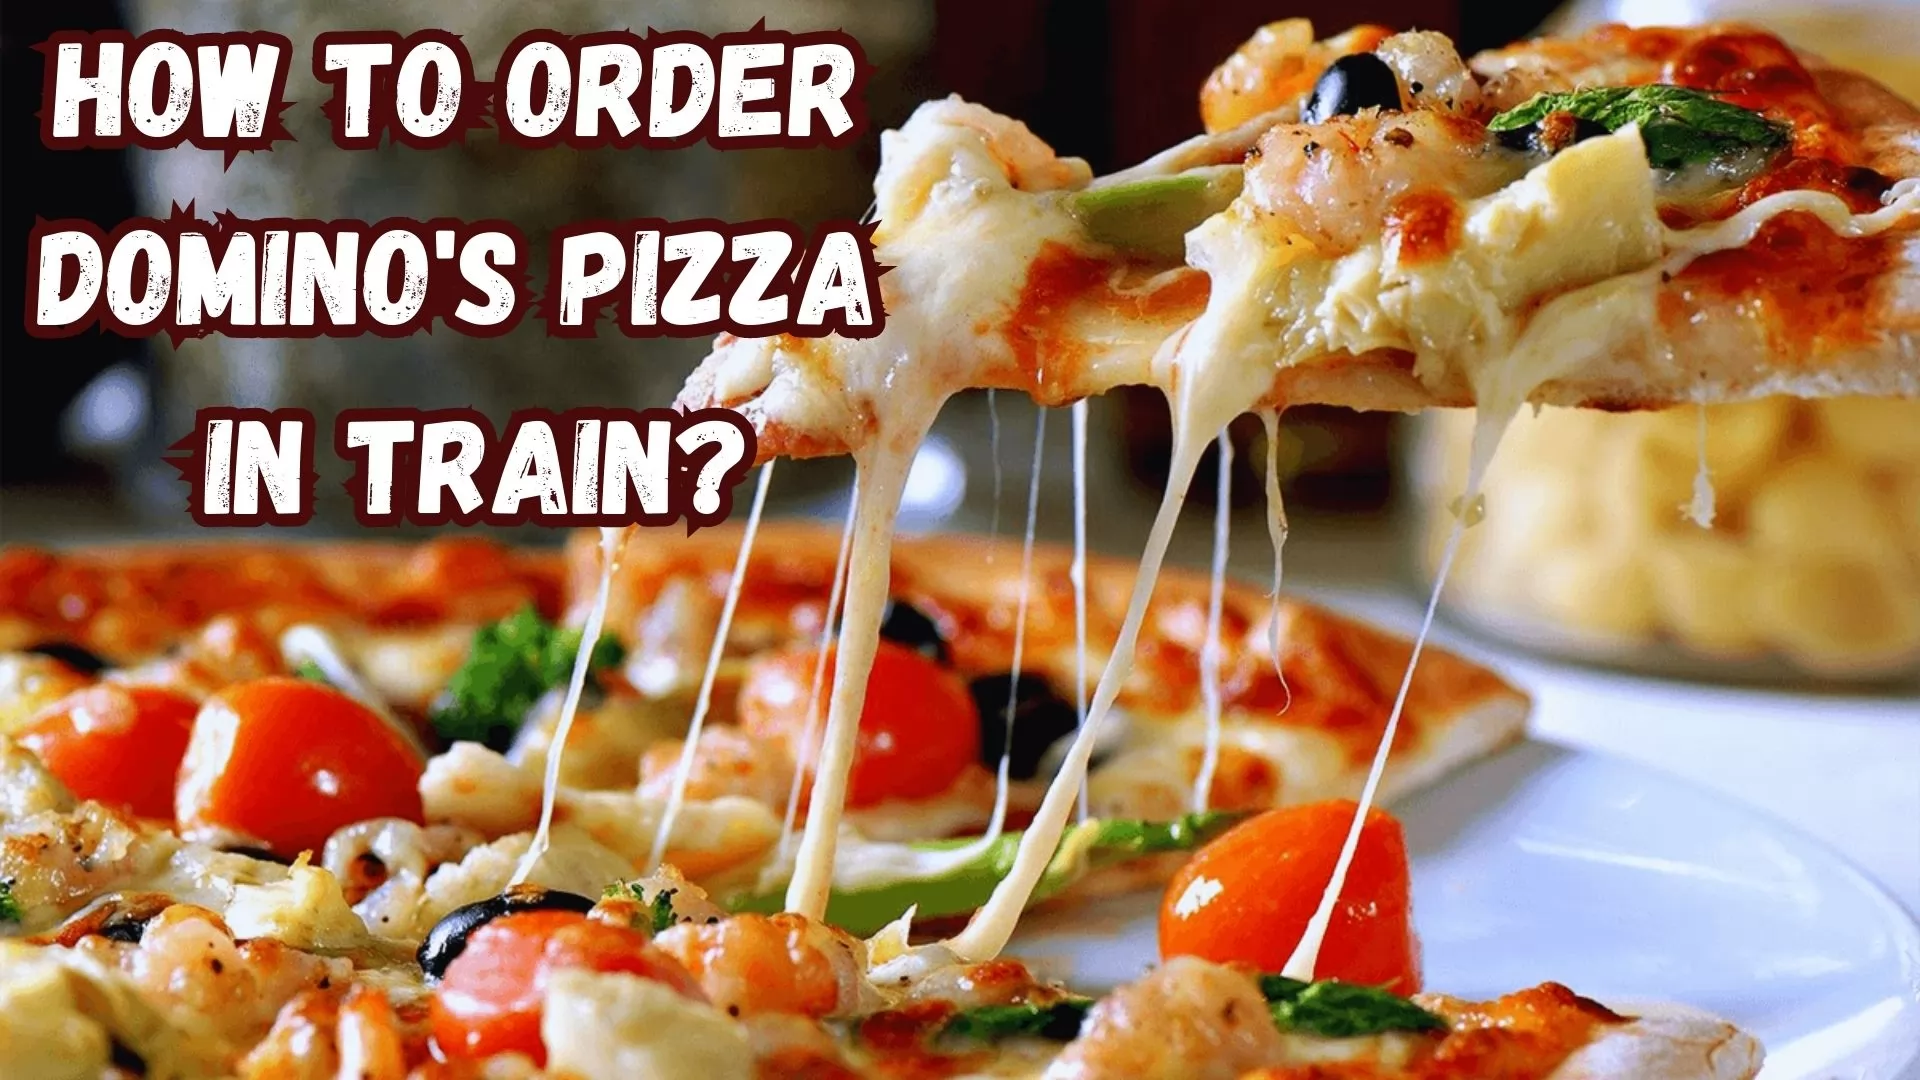 How To Order Domino's Pizza In Train?